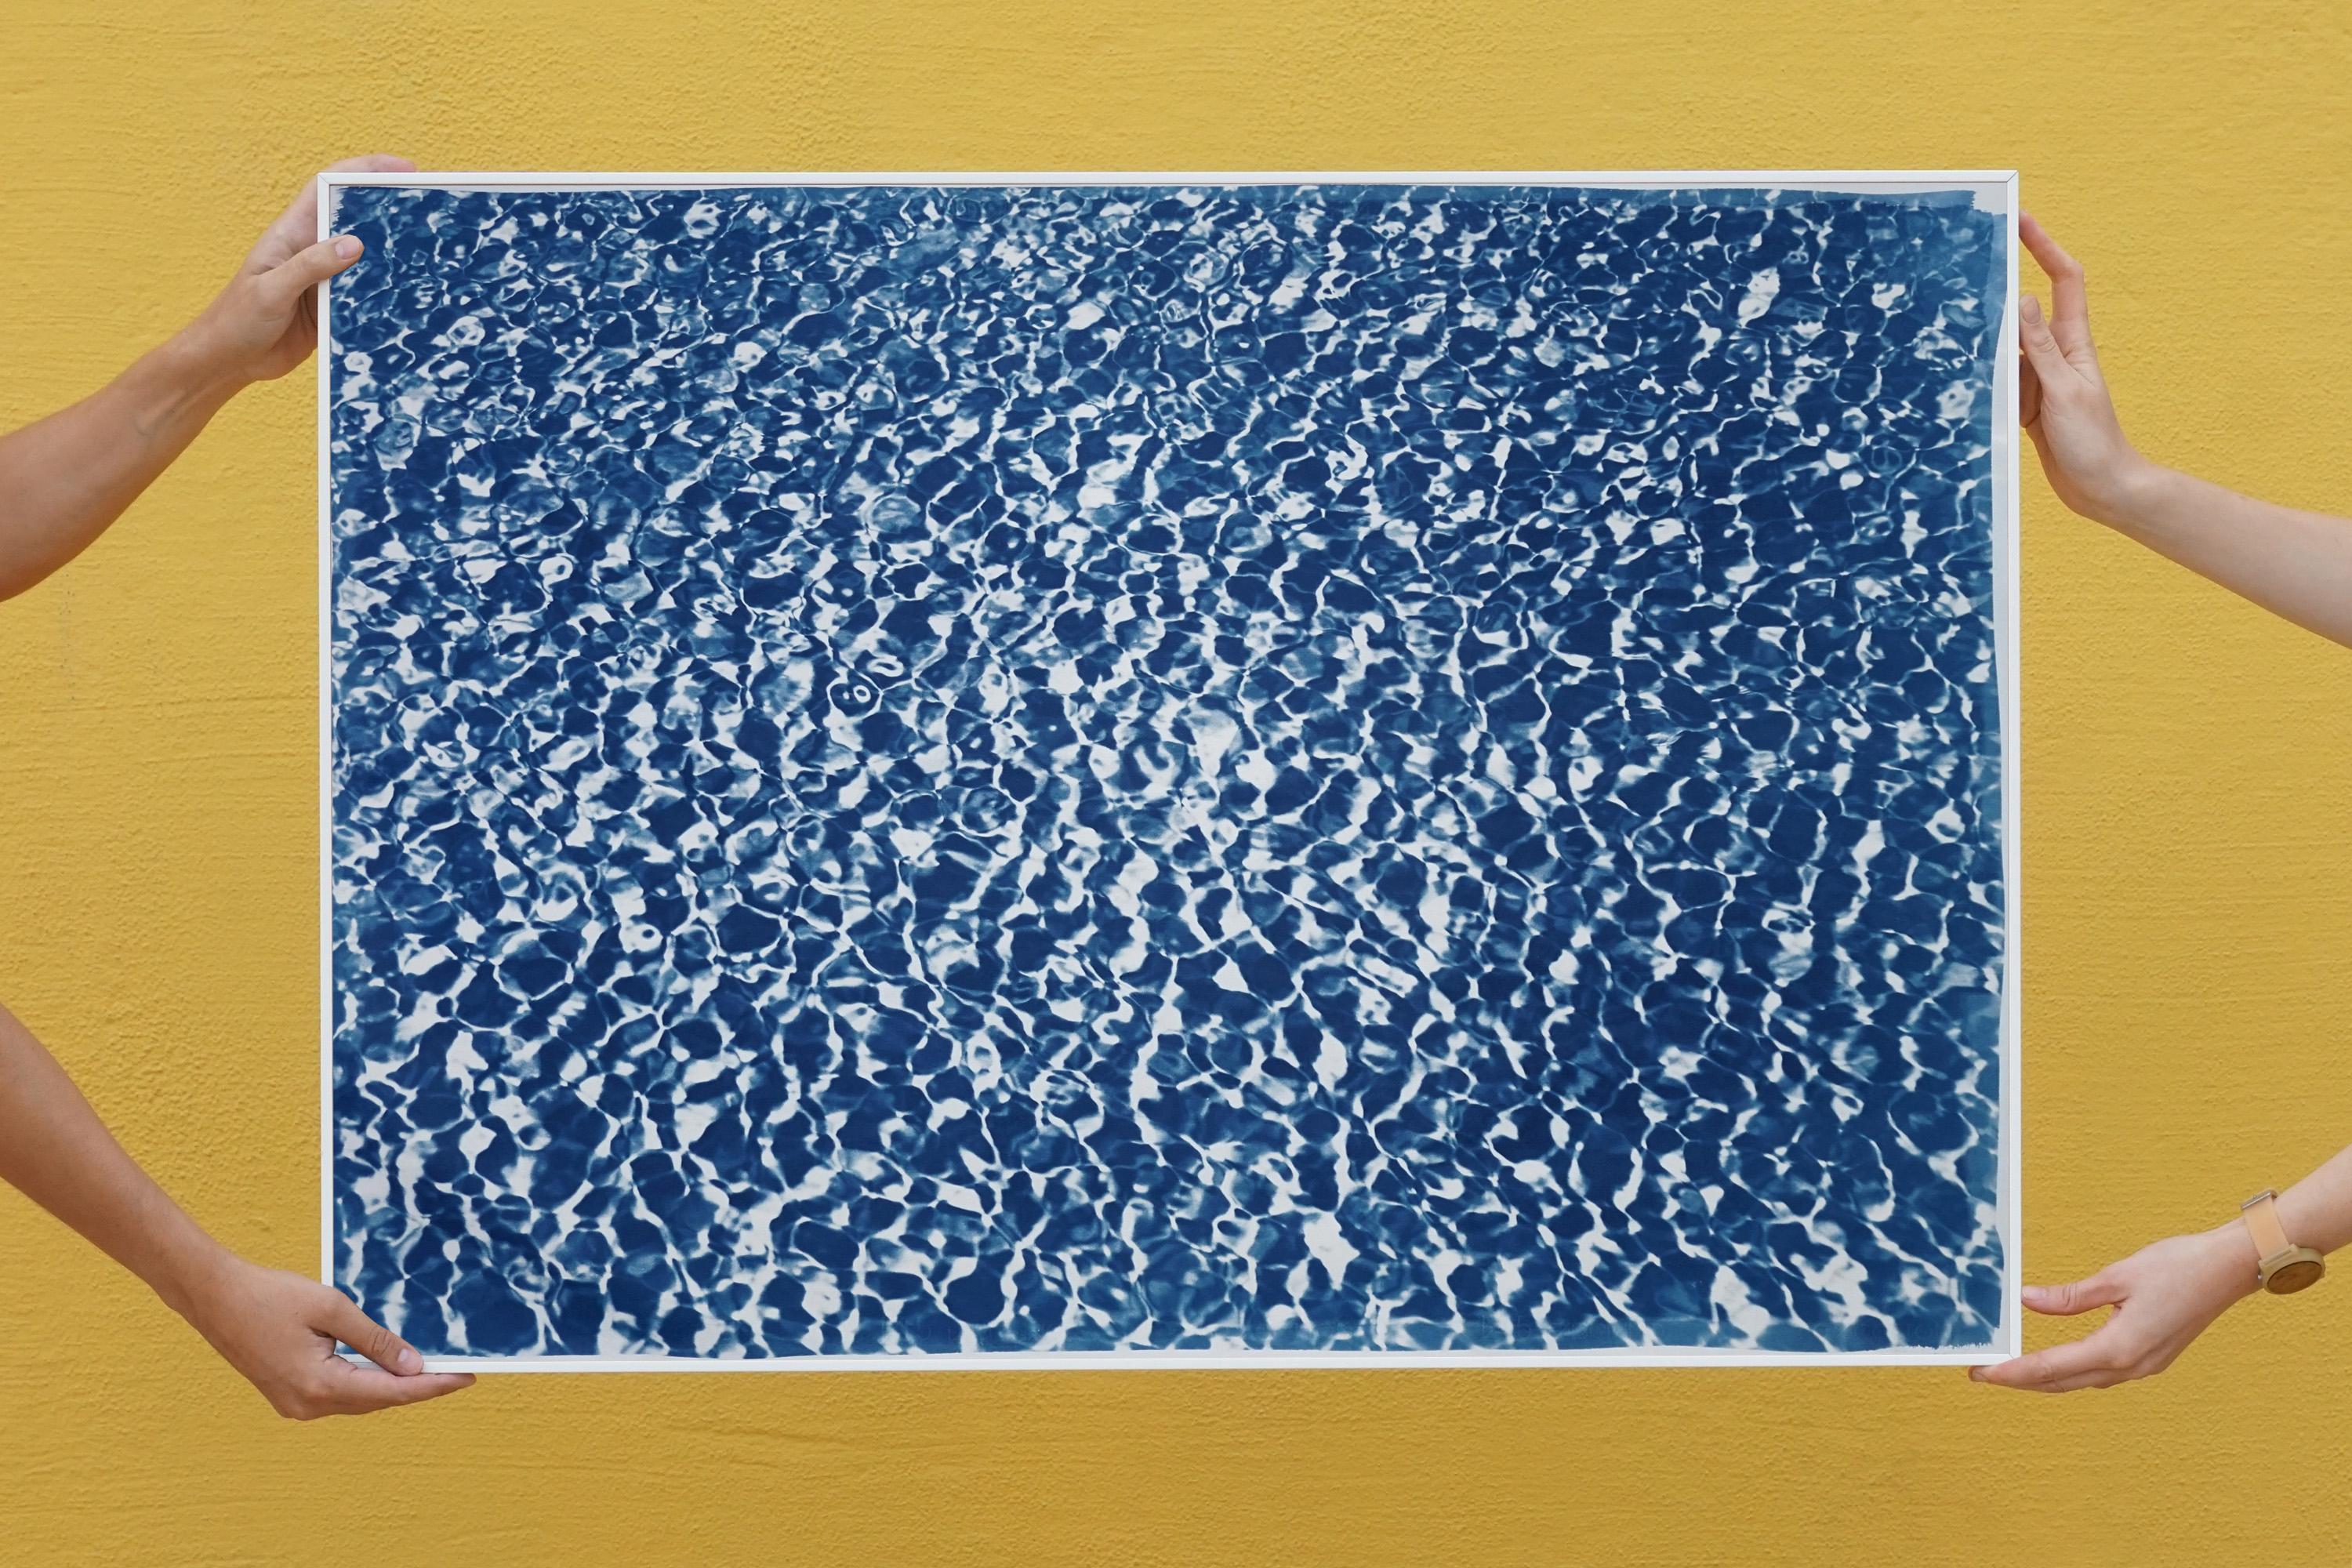 Infinity Pool Water Reflections, Blue & White Pattern, Handmade Cyanotype Print For Sale 7